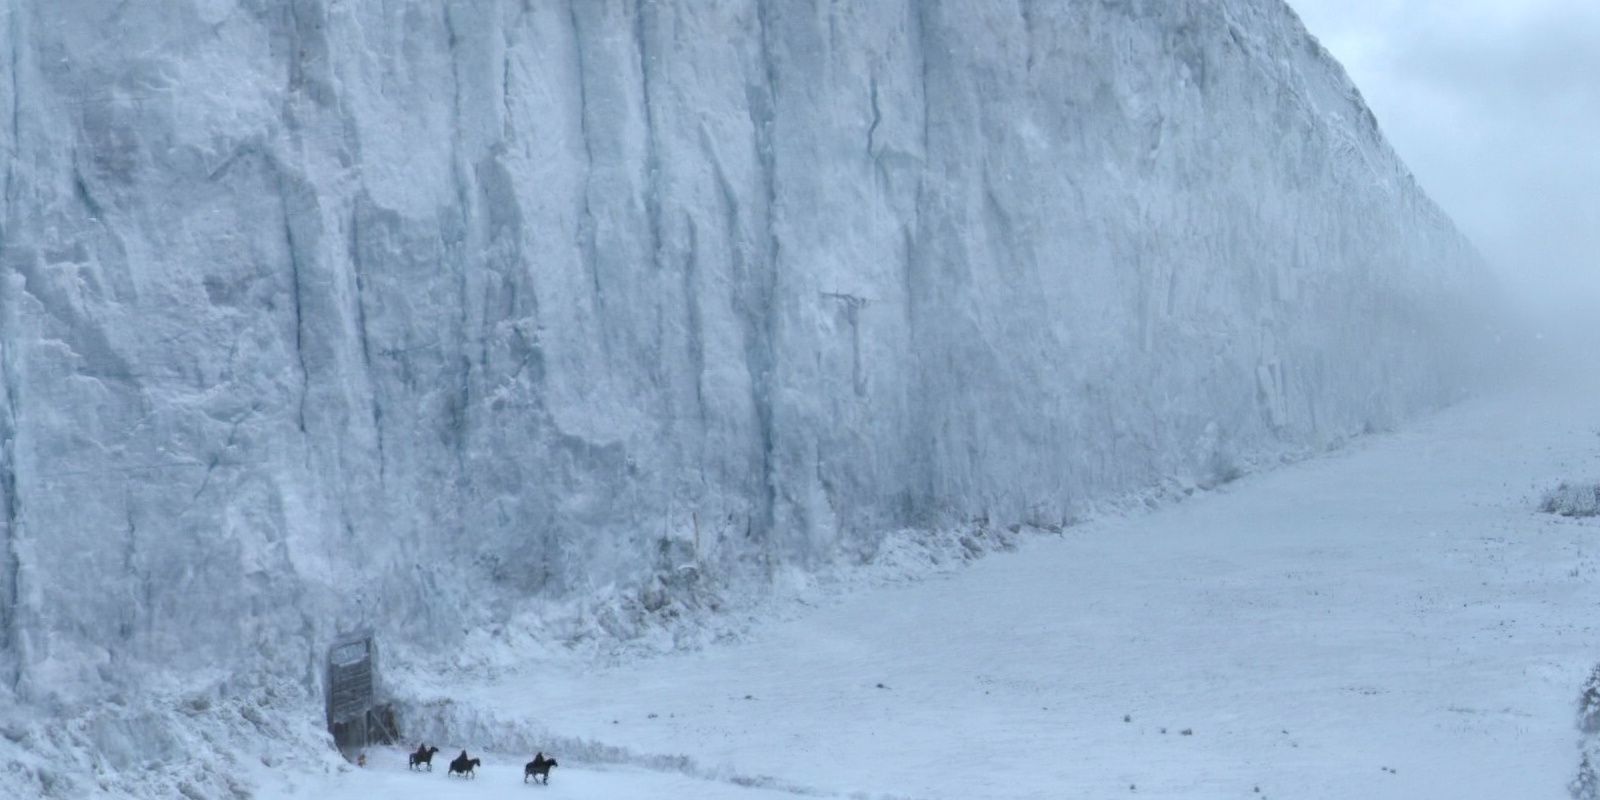 The Wall on Game of Thrones